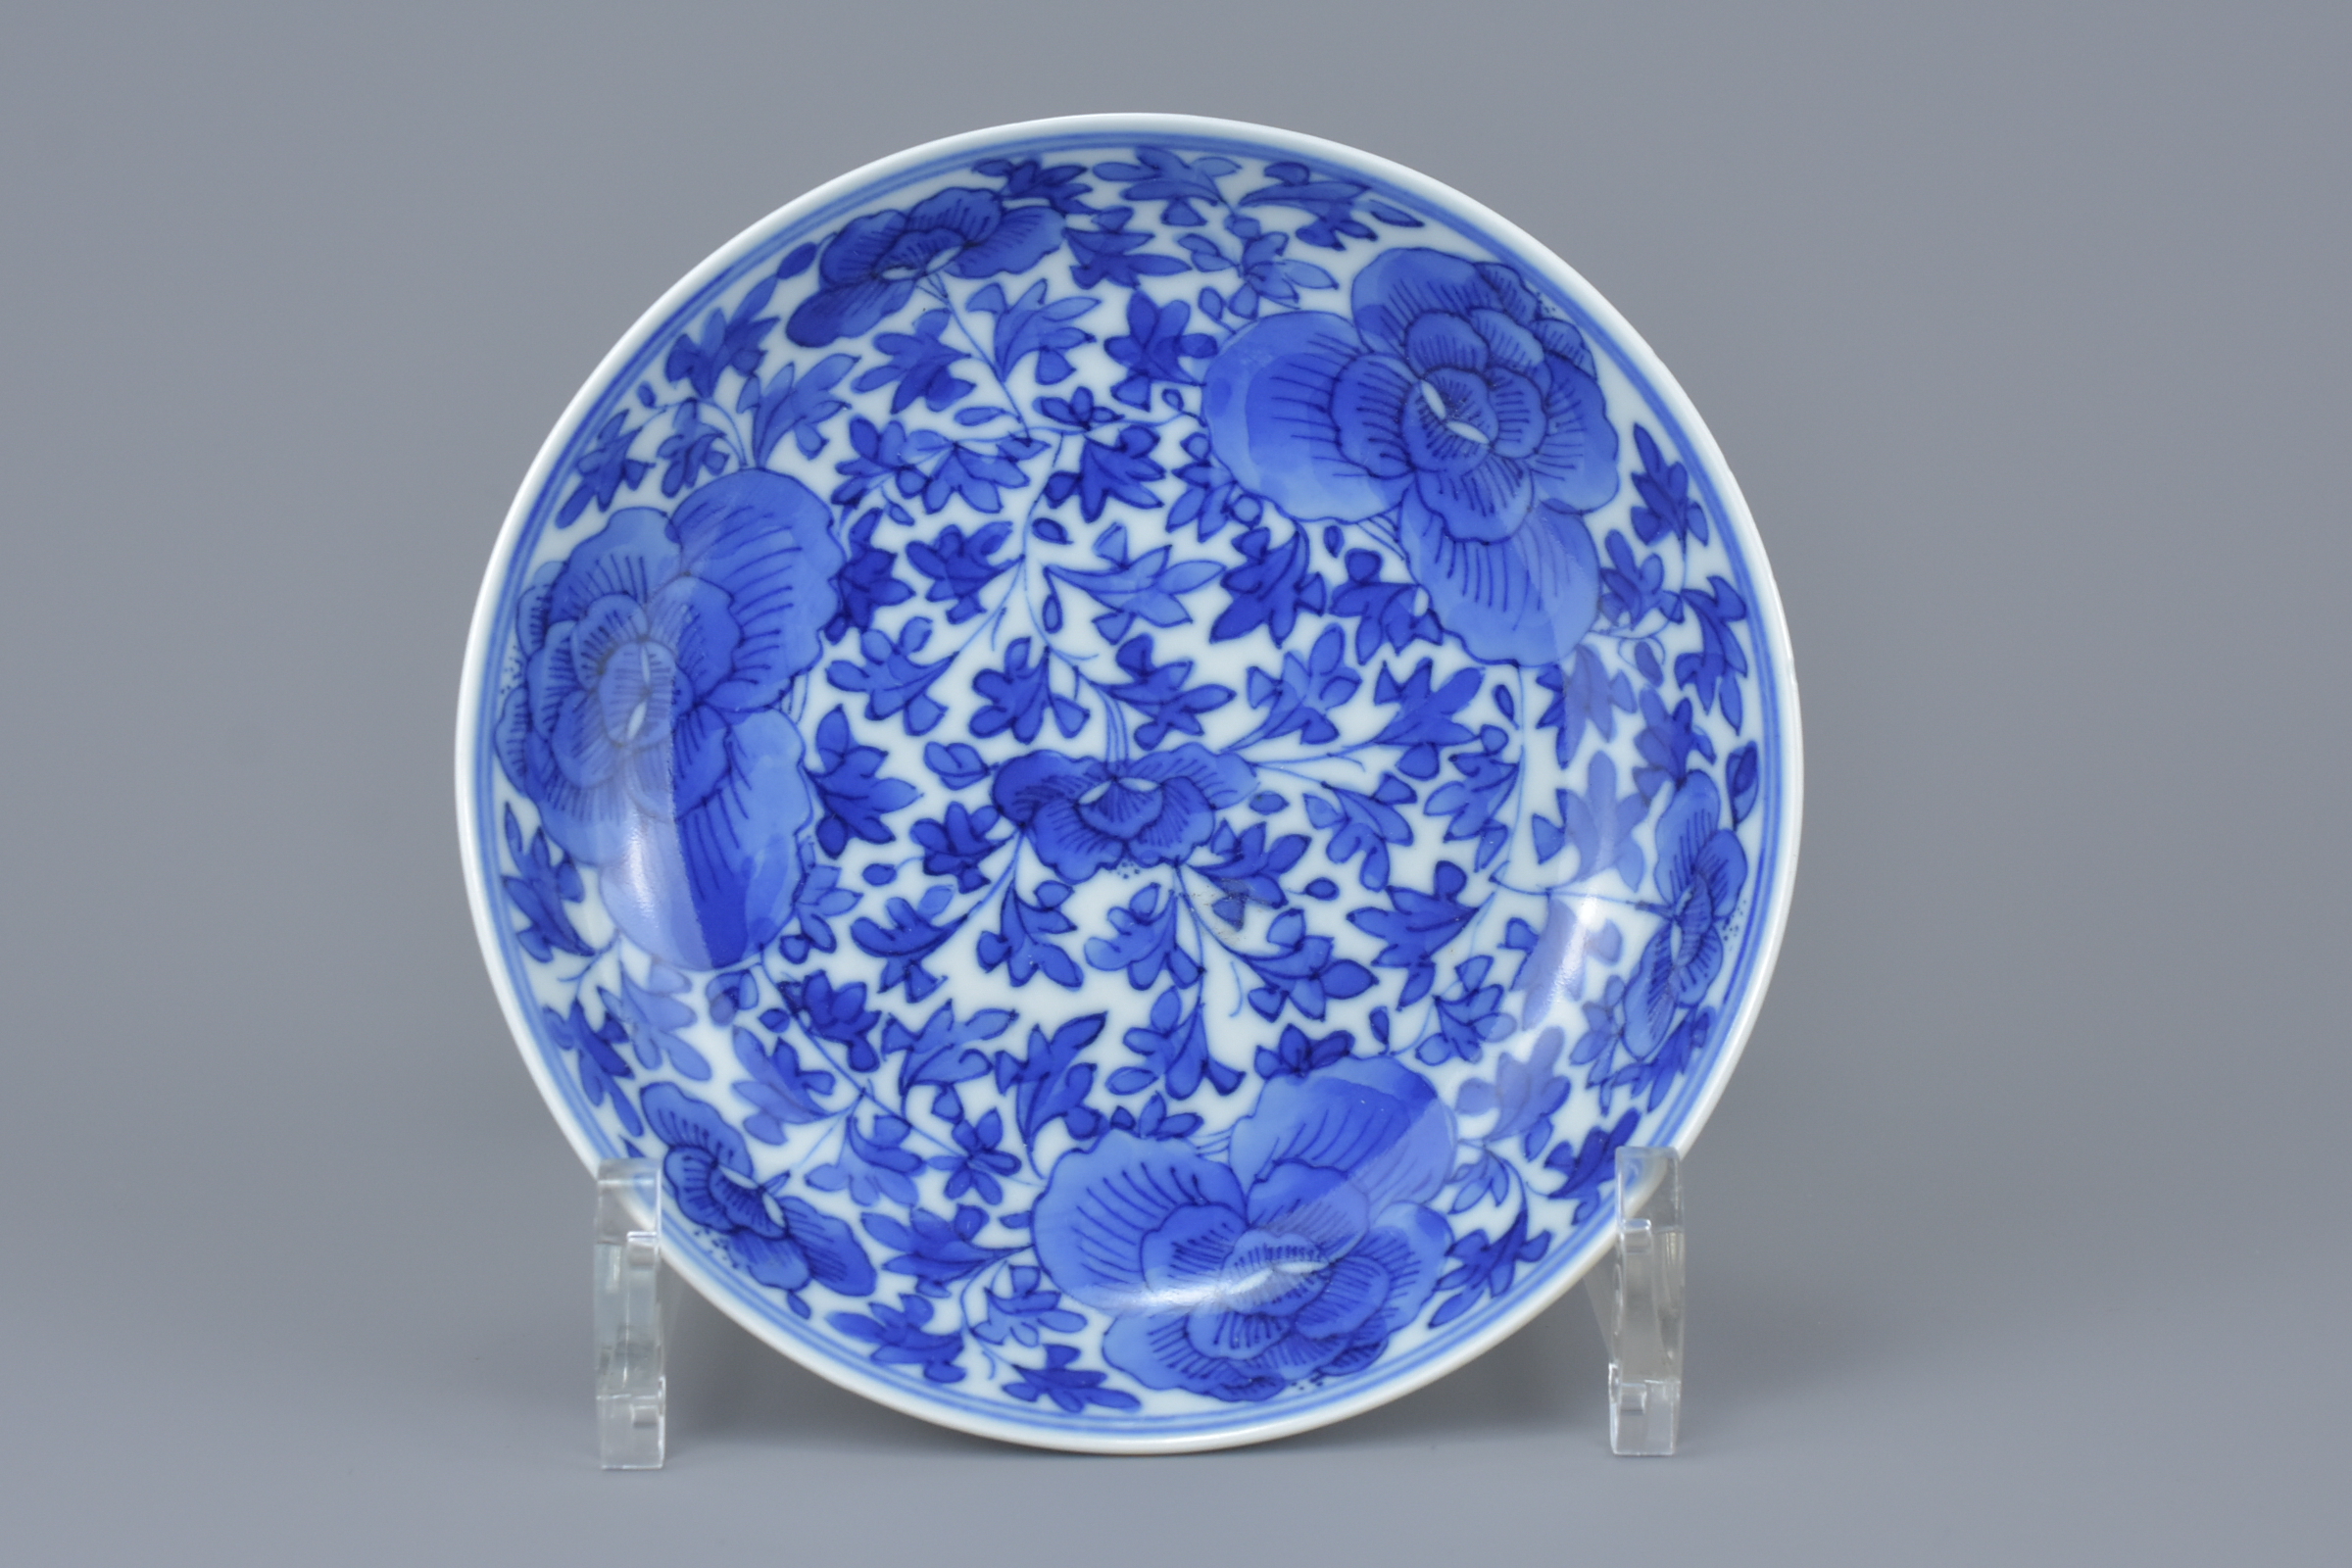 Pair of 19th century Chinese Porcelain Blue and White Saucers with four character hallmark and Wooll - Image 6 of 7